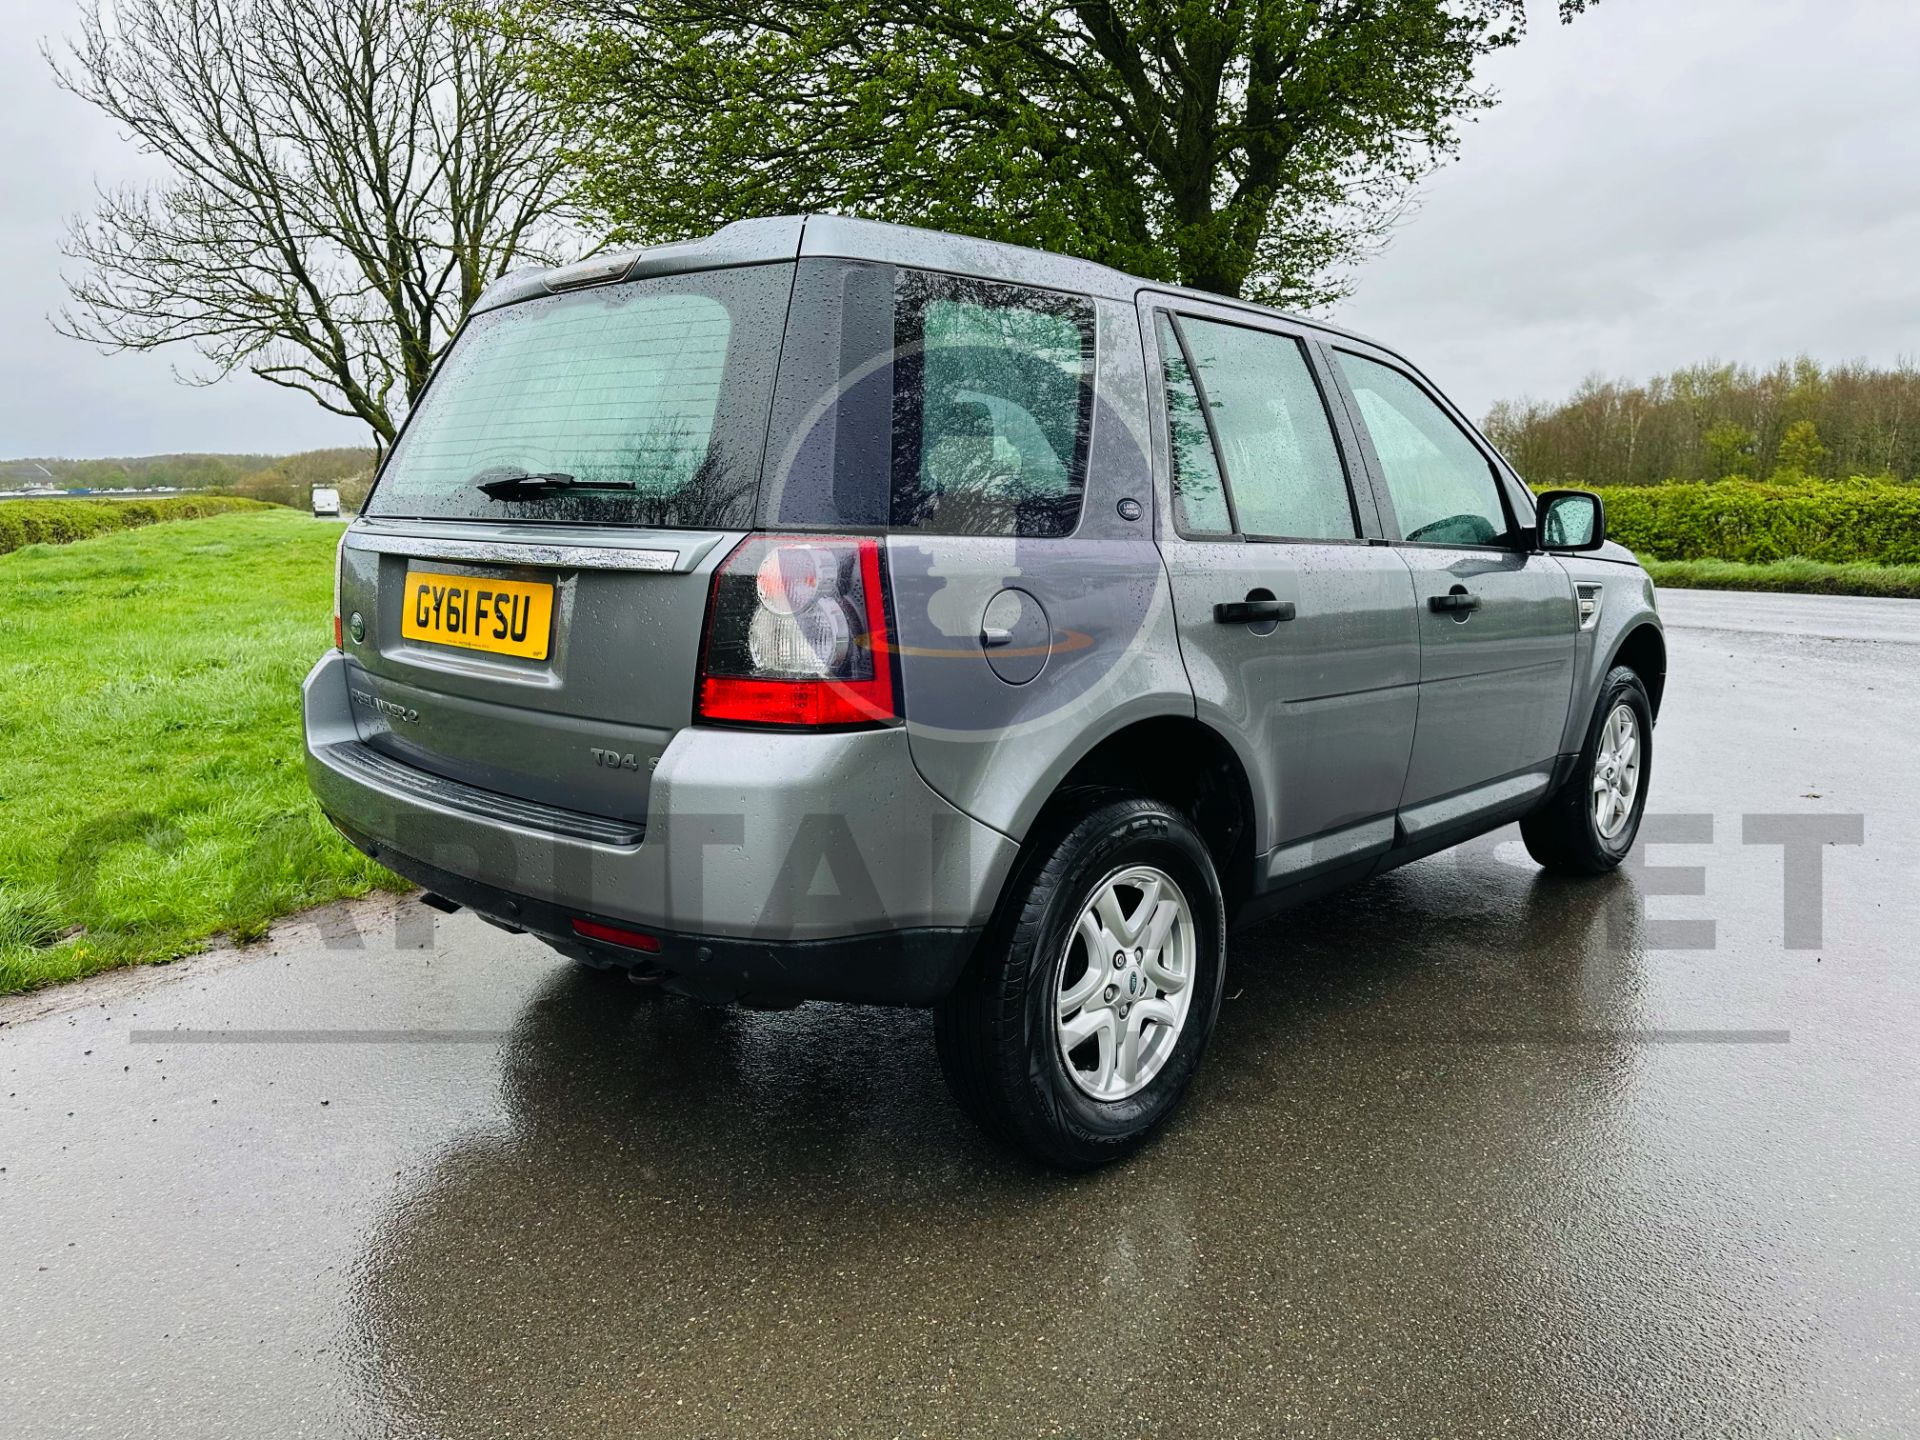 (ON SALE) LANDROVER FREELANDER 2.2TD4 S EDITION "AUTO - 2012 MODEL - AIR CON - FSH - Image 9 of 33